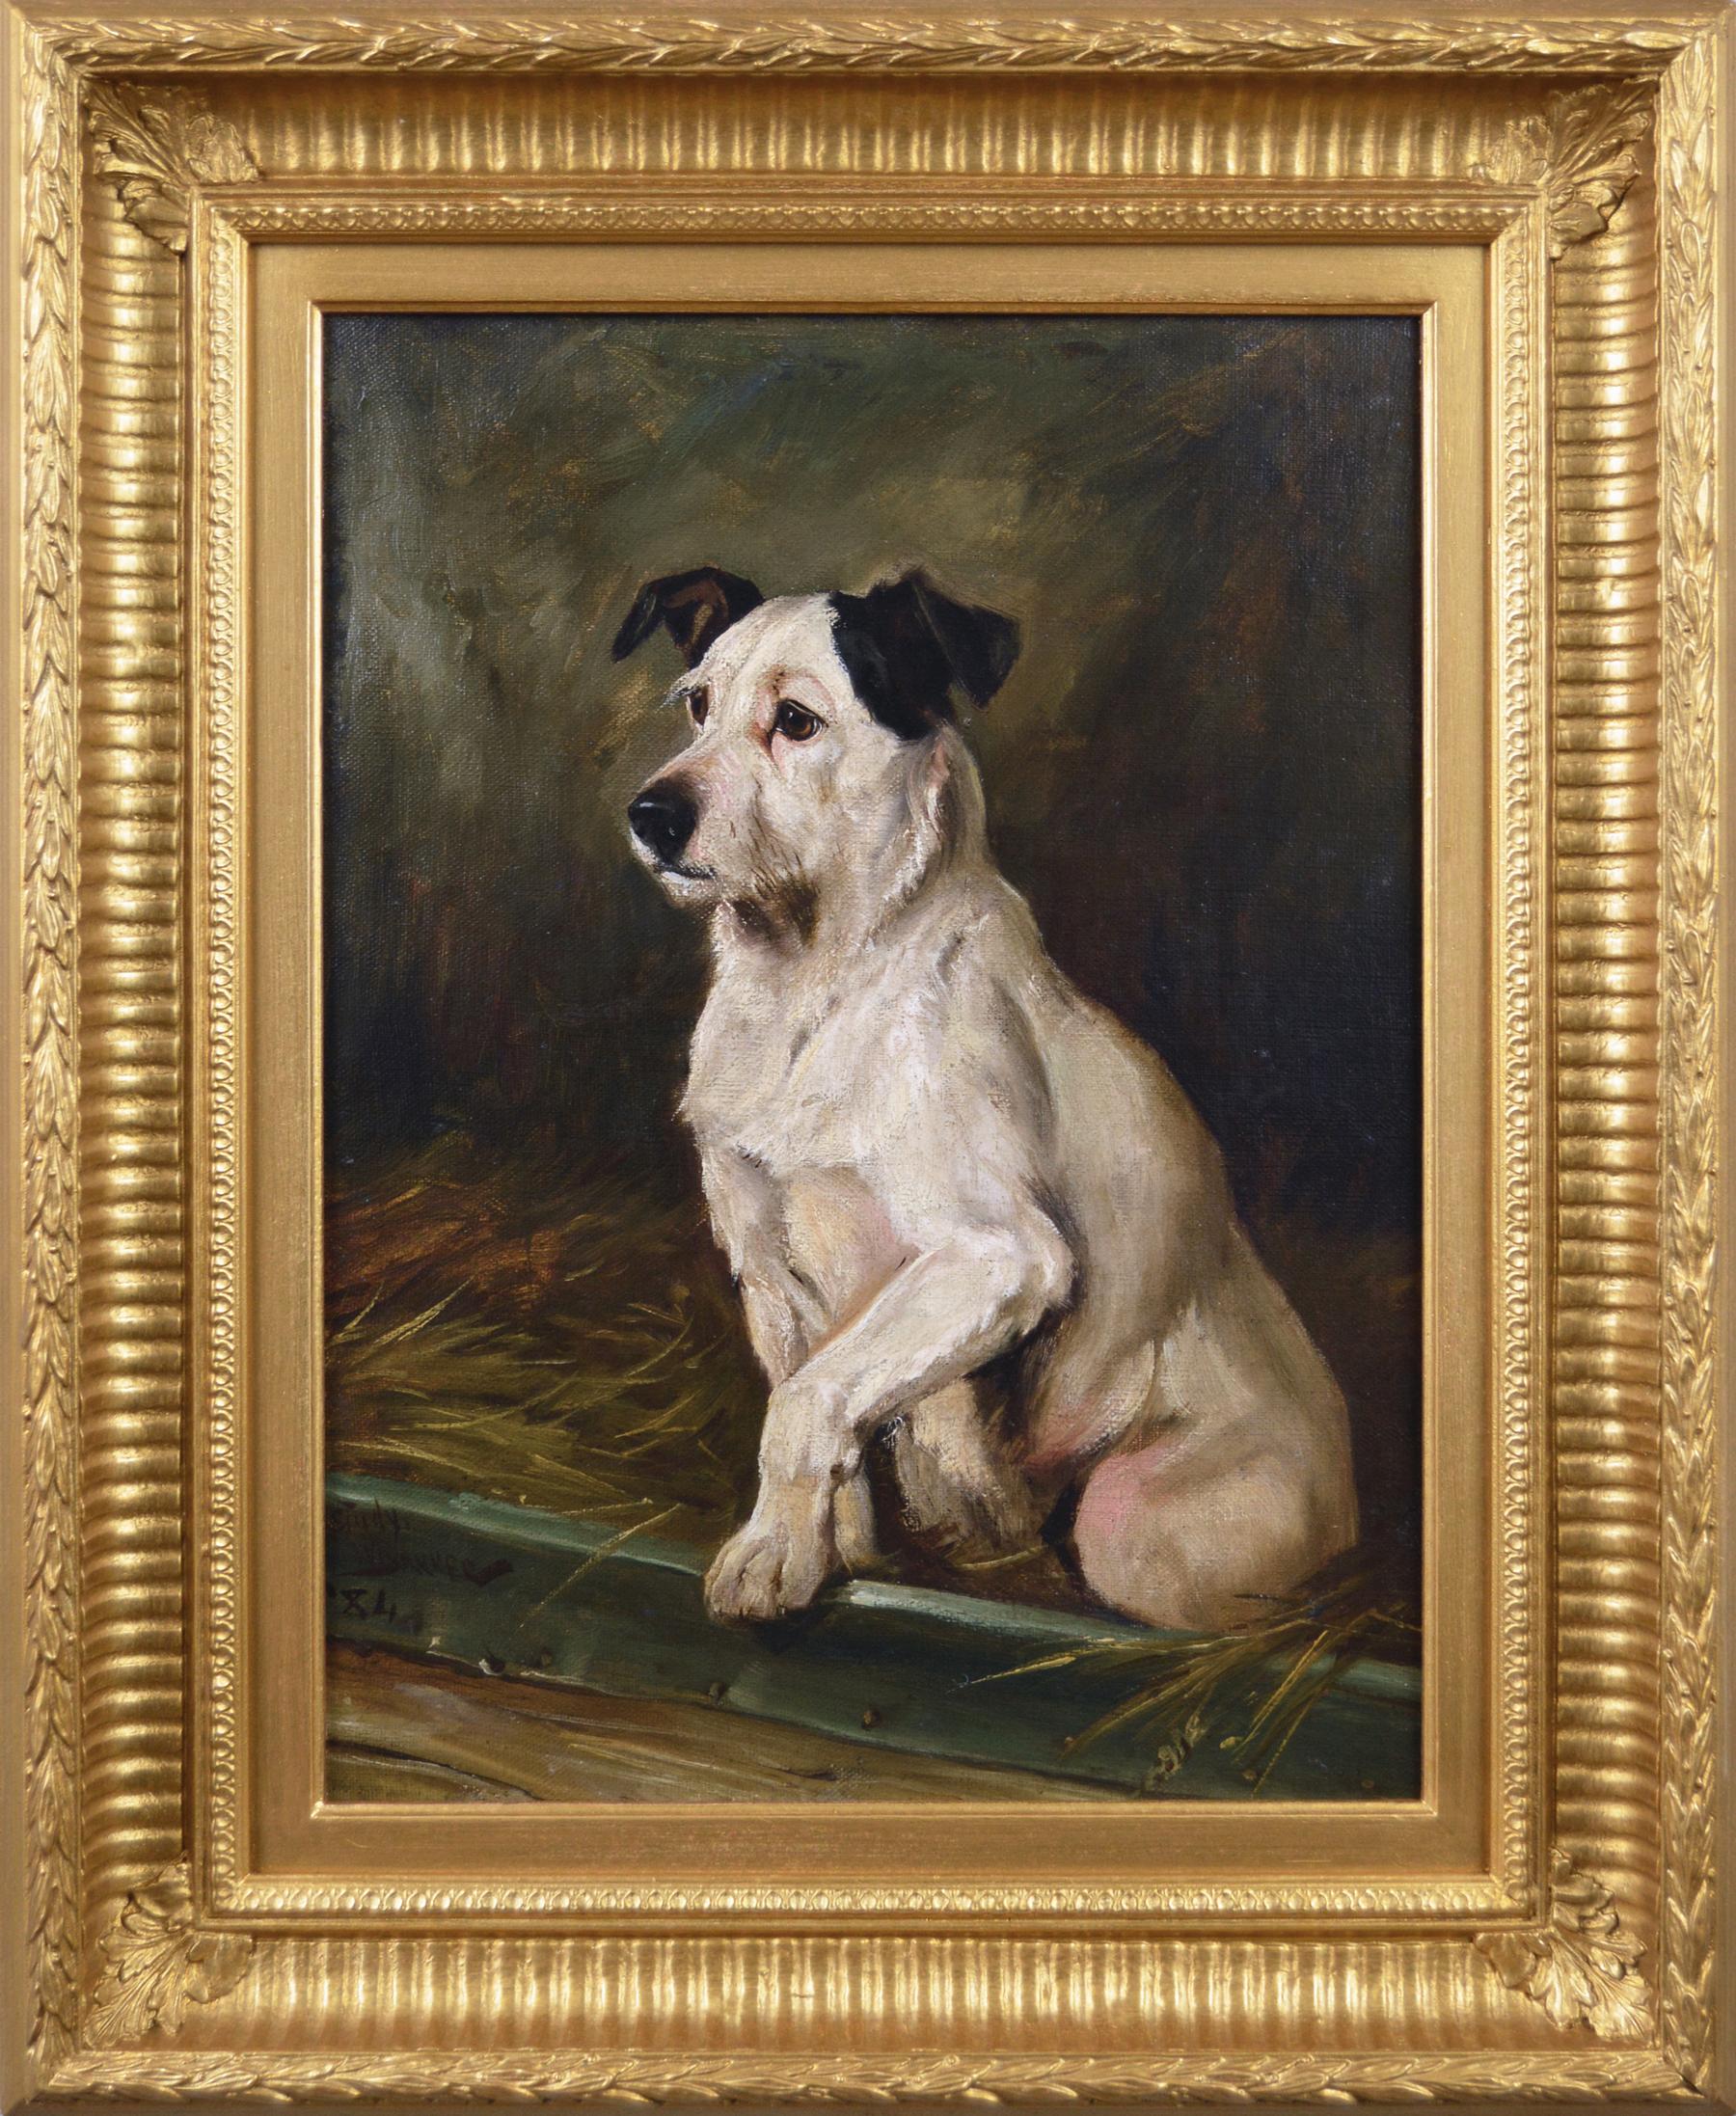 Wright Barker Animal Painting - 19th Century dog portrait oil painting of a Terrier 